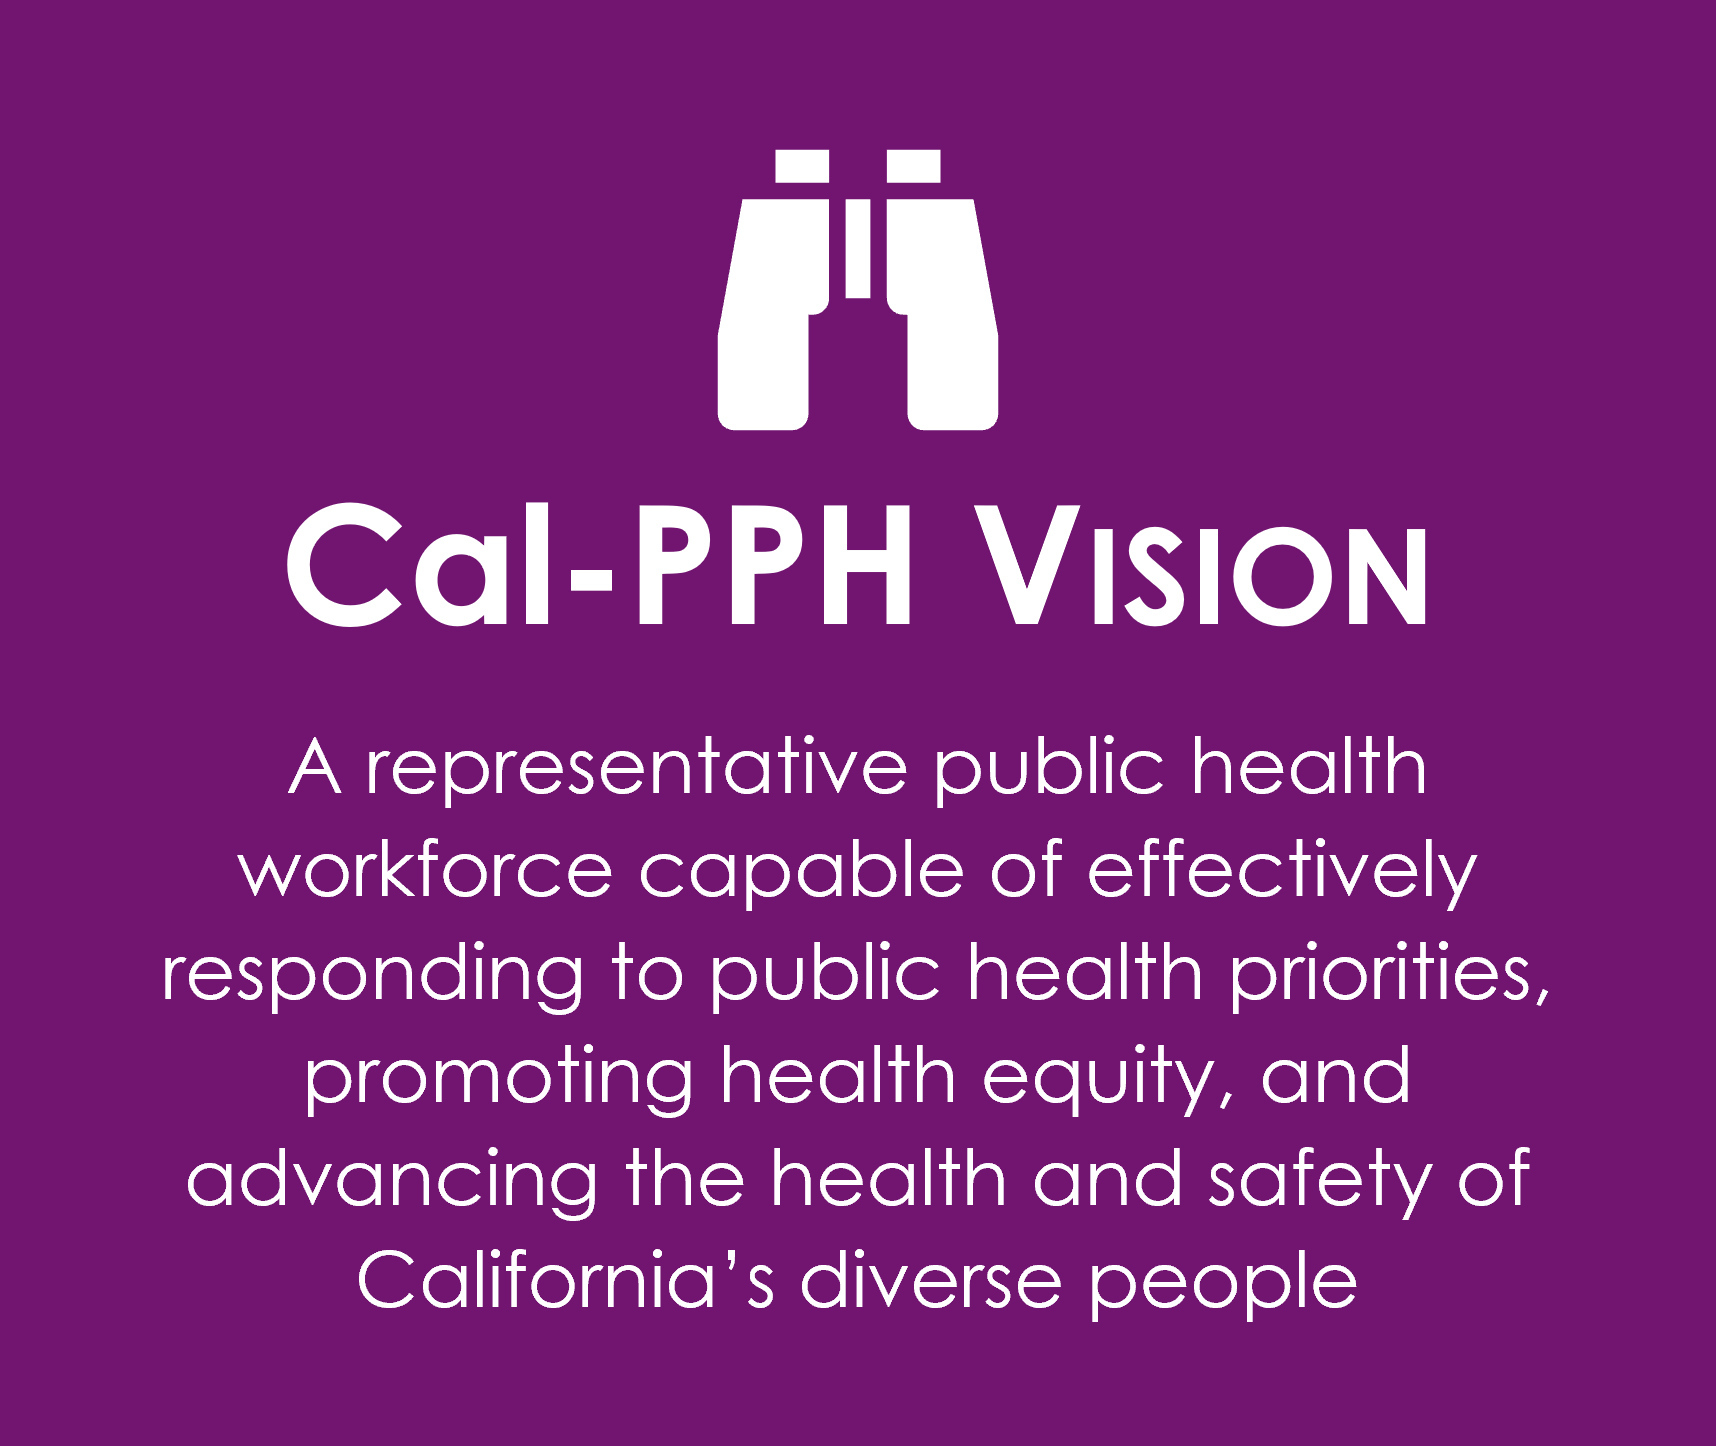 Cal-PPH Vision: A representative public health workforce capable of effectively responding to public health priorities, promoting health equity, and advancing the health and safety of California's diverse people.